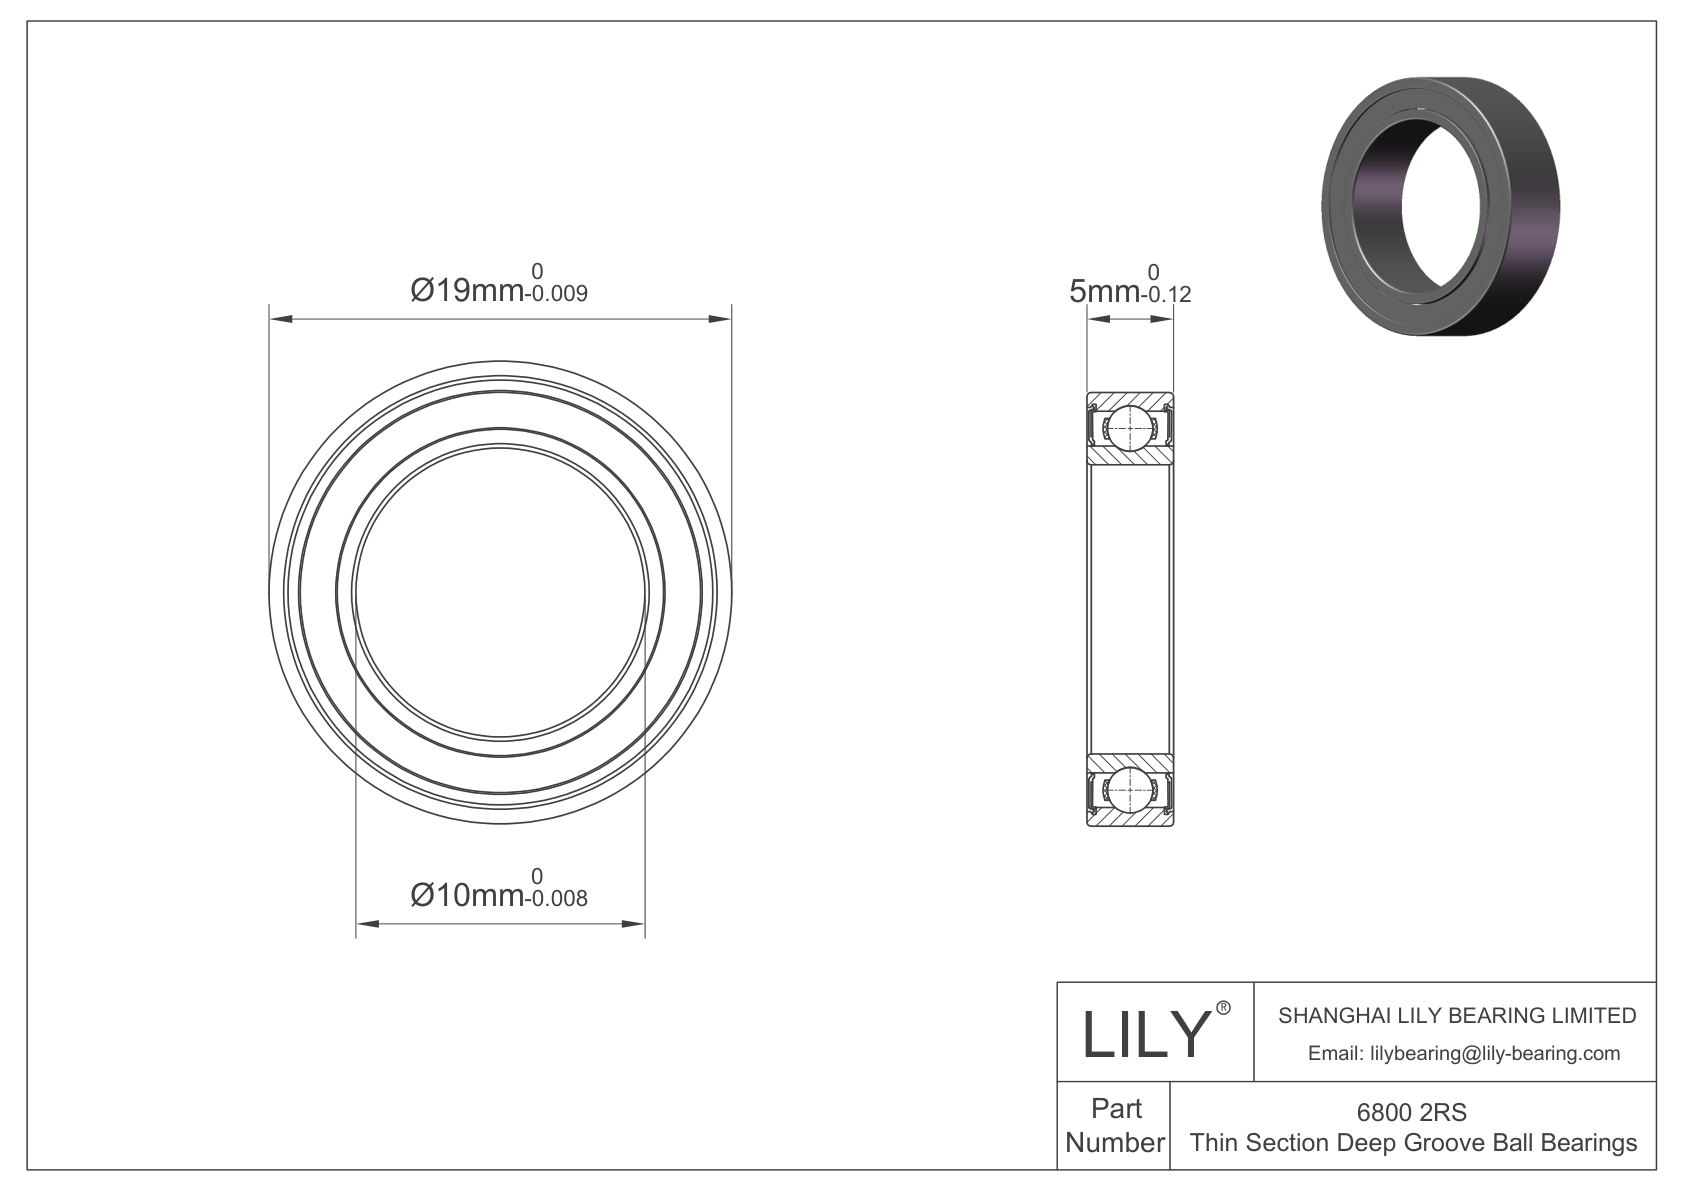 LILY-PUT680030-45 Outsourcing Polyurethane bearings cad drawing